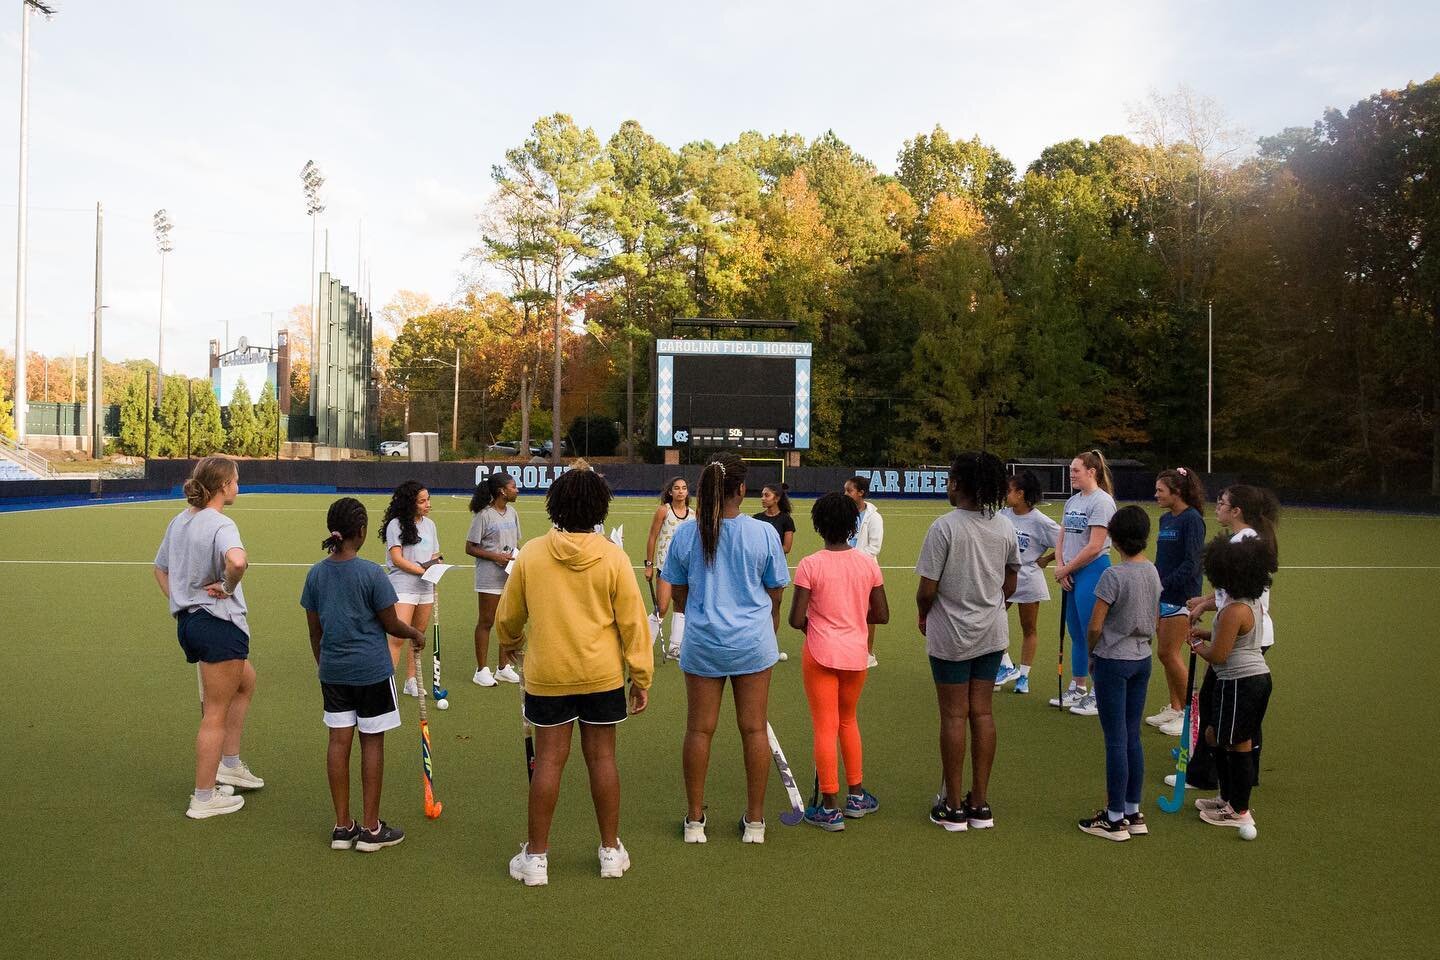 Last weekend, Beyond Our Game hosted our first diversity field hockey clinic in partnership with Evenin&rsquo; Out The Playing Field (@noraxelsayed @valeryorellanaa)! 

It was incredible to see a field hockey field with young women from so many uniqu